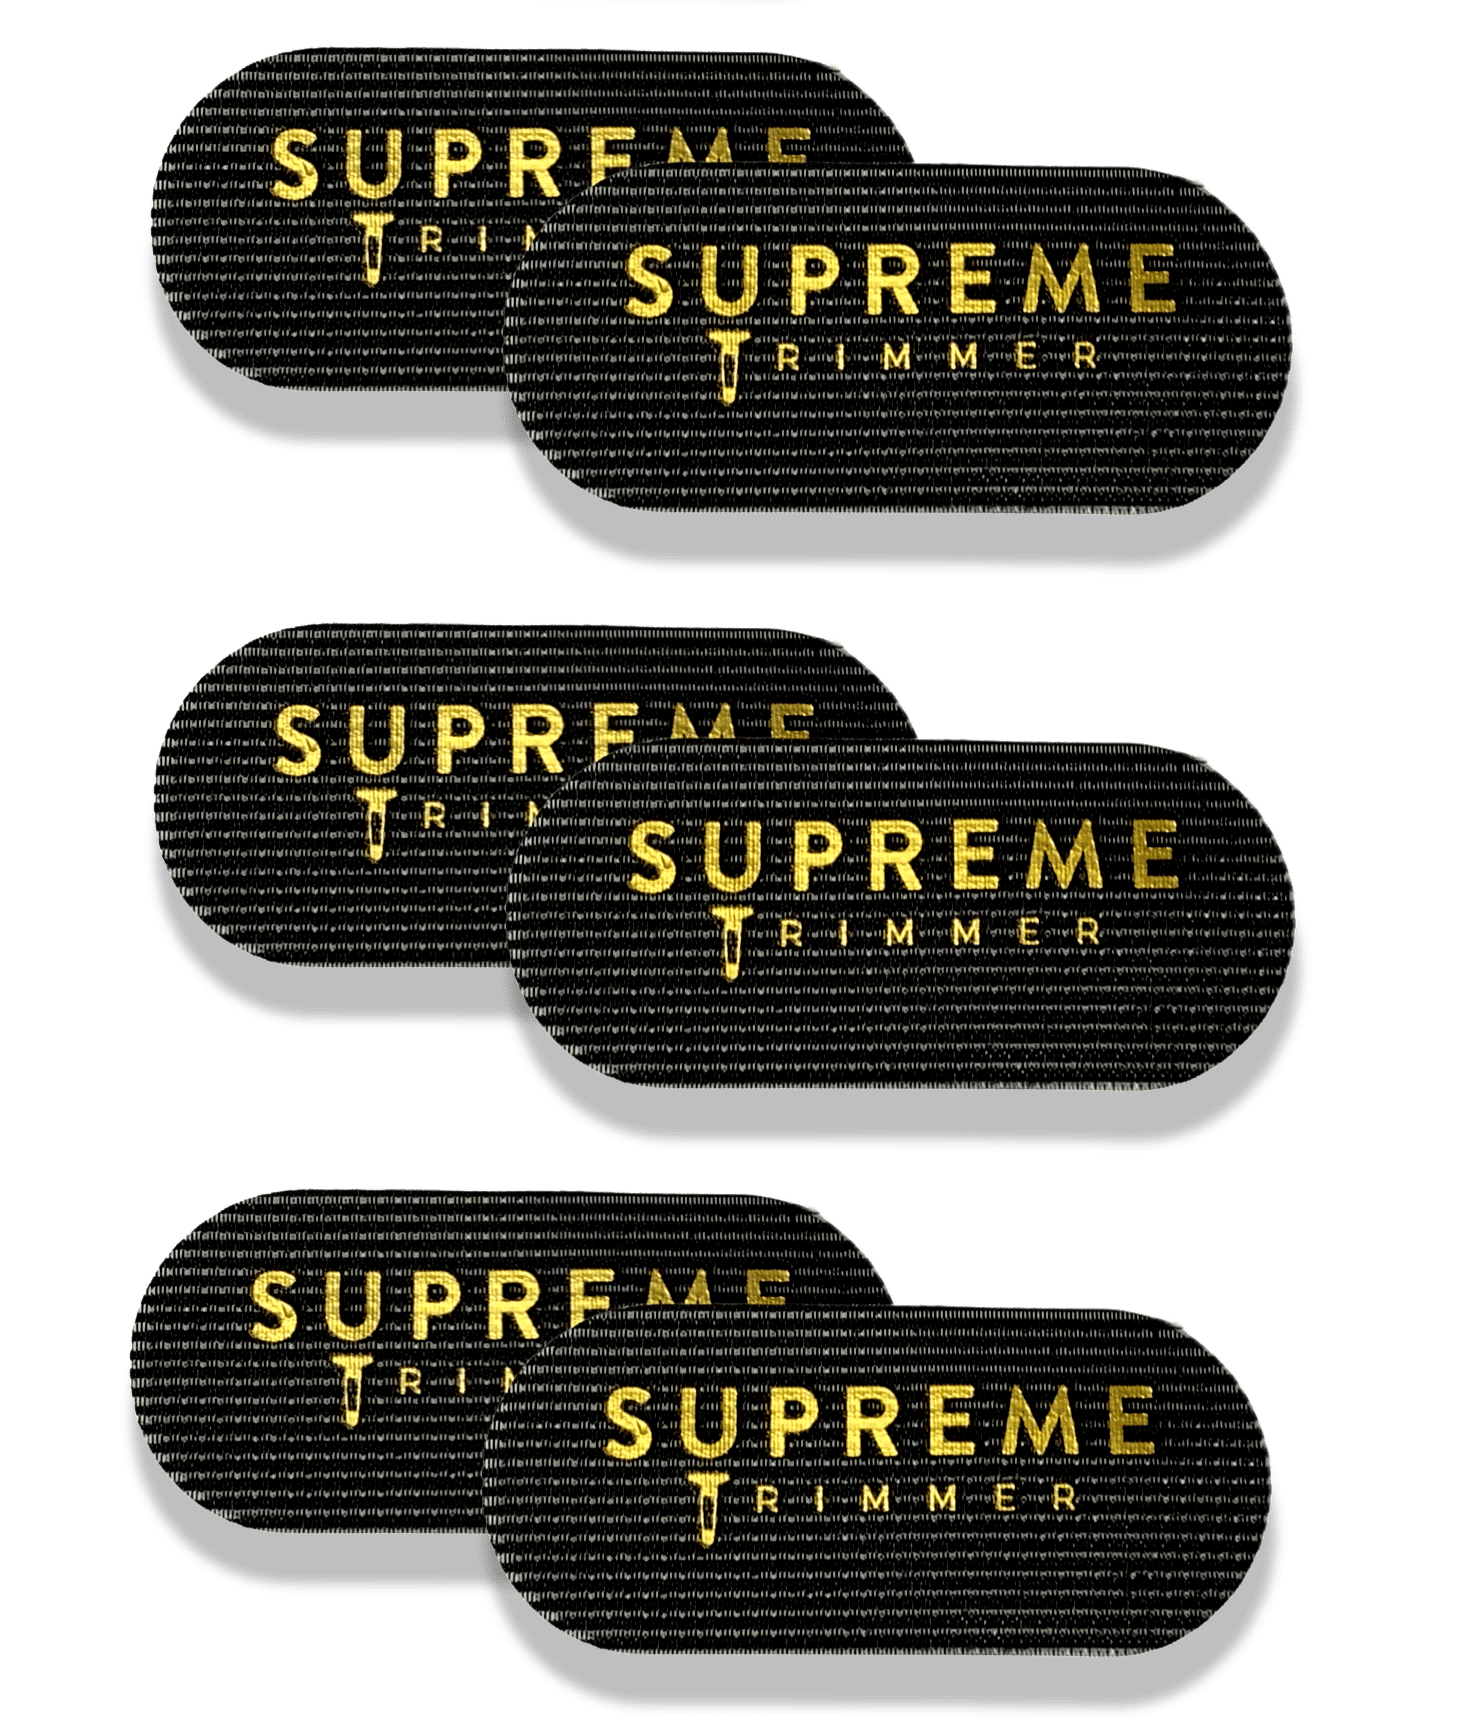 Supreme Clipper Grips Medium and Large Grippers